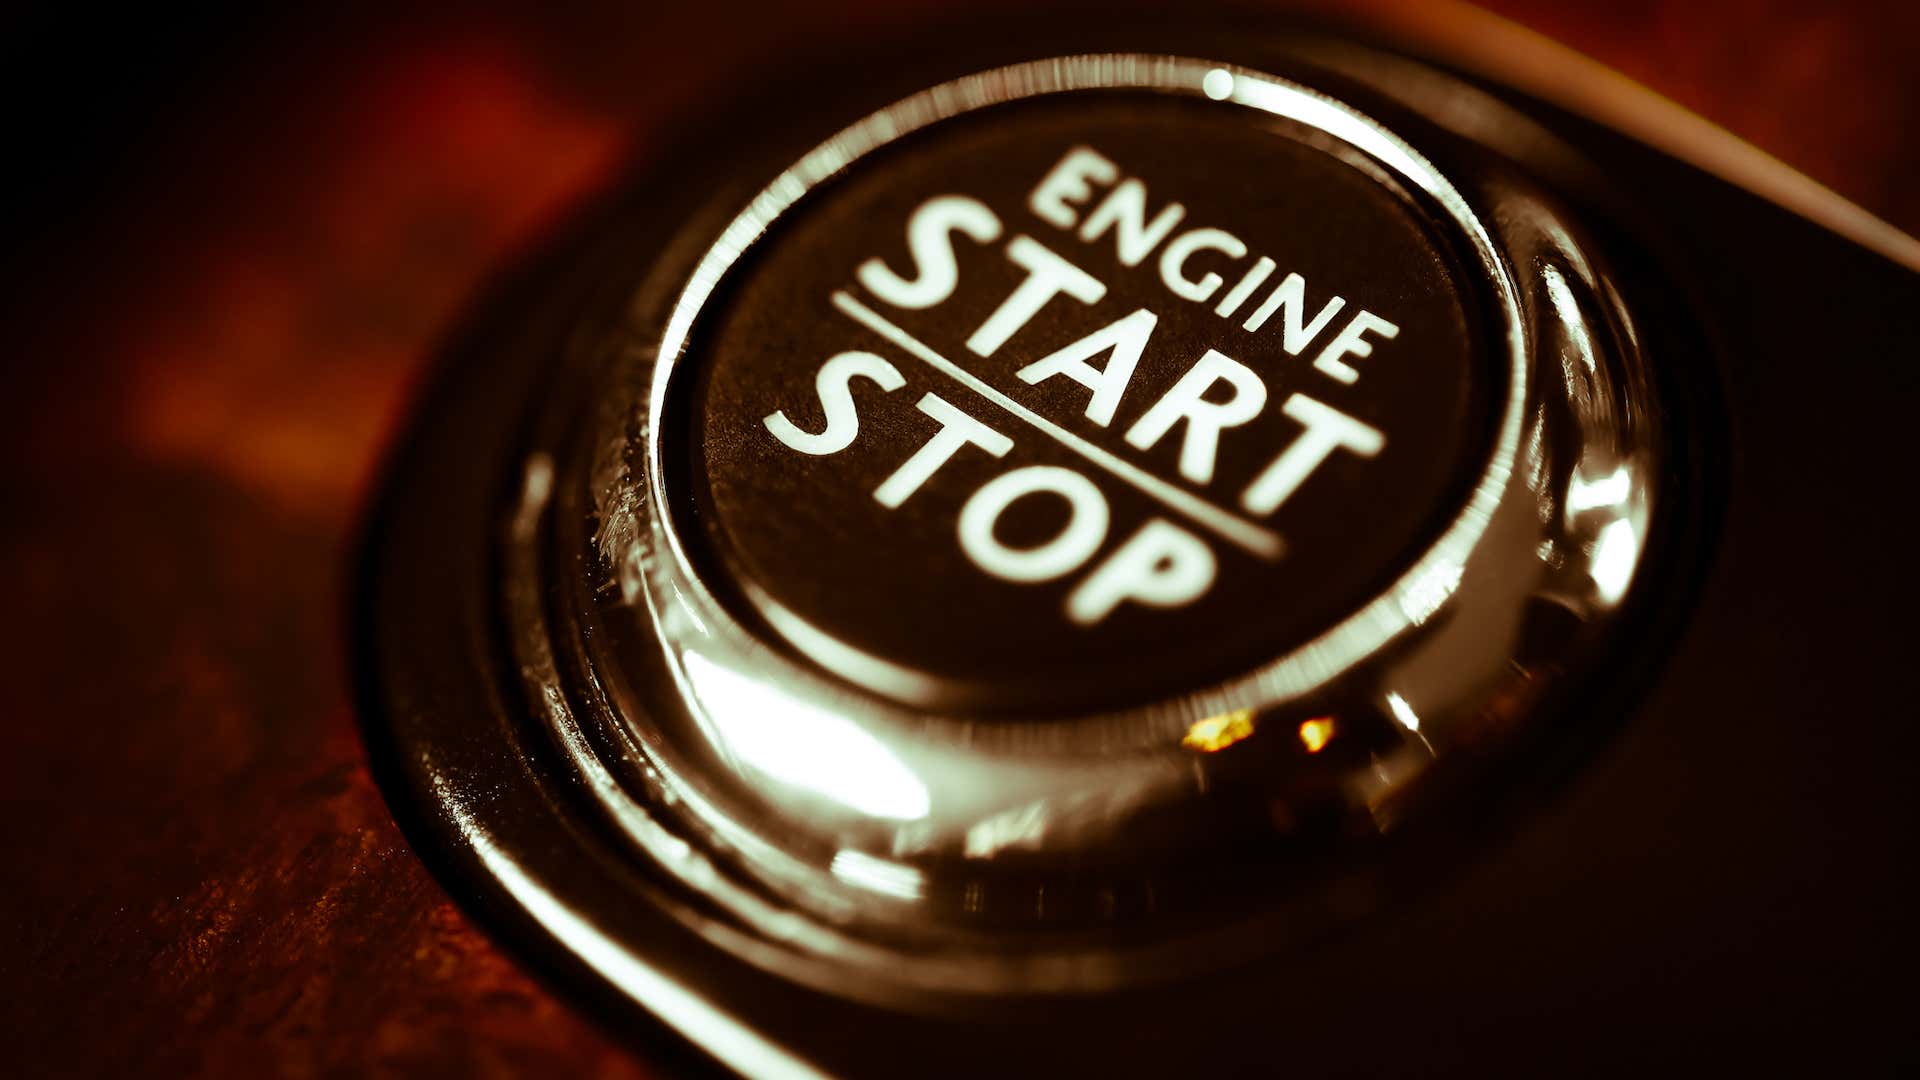 Lucky you with the fancy push-button start.